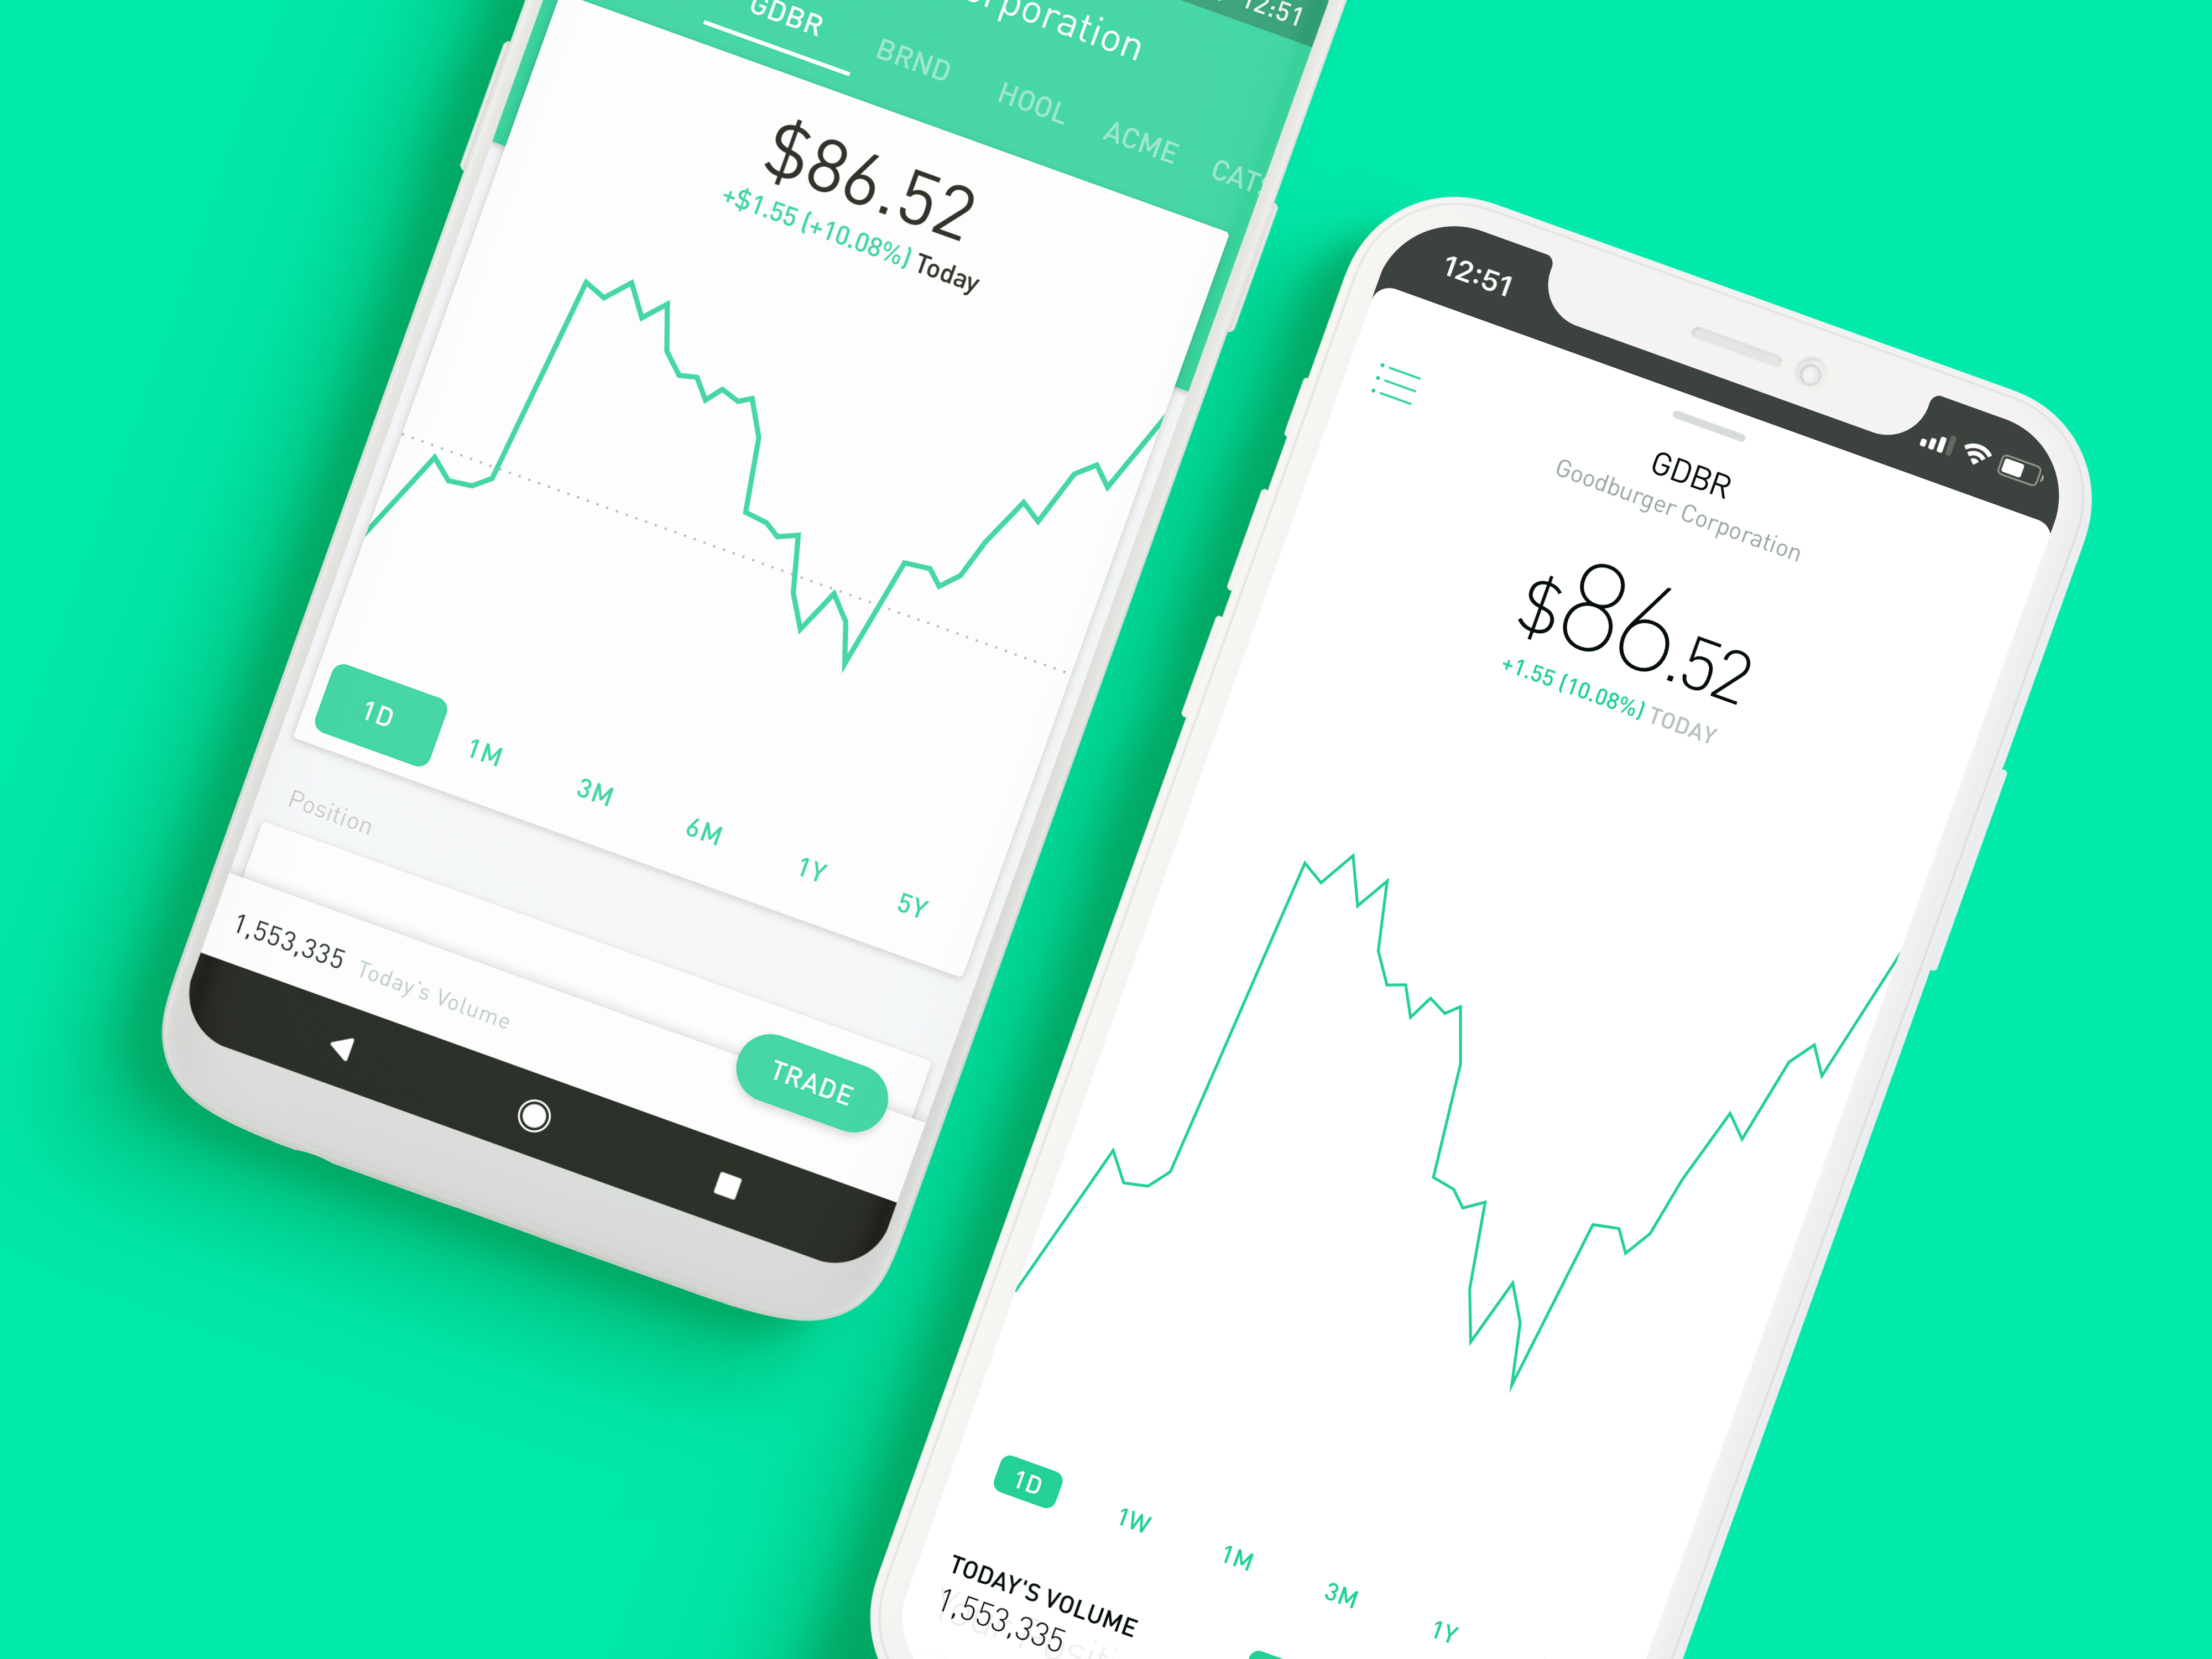 Robin hood investing android s and p futures investing